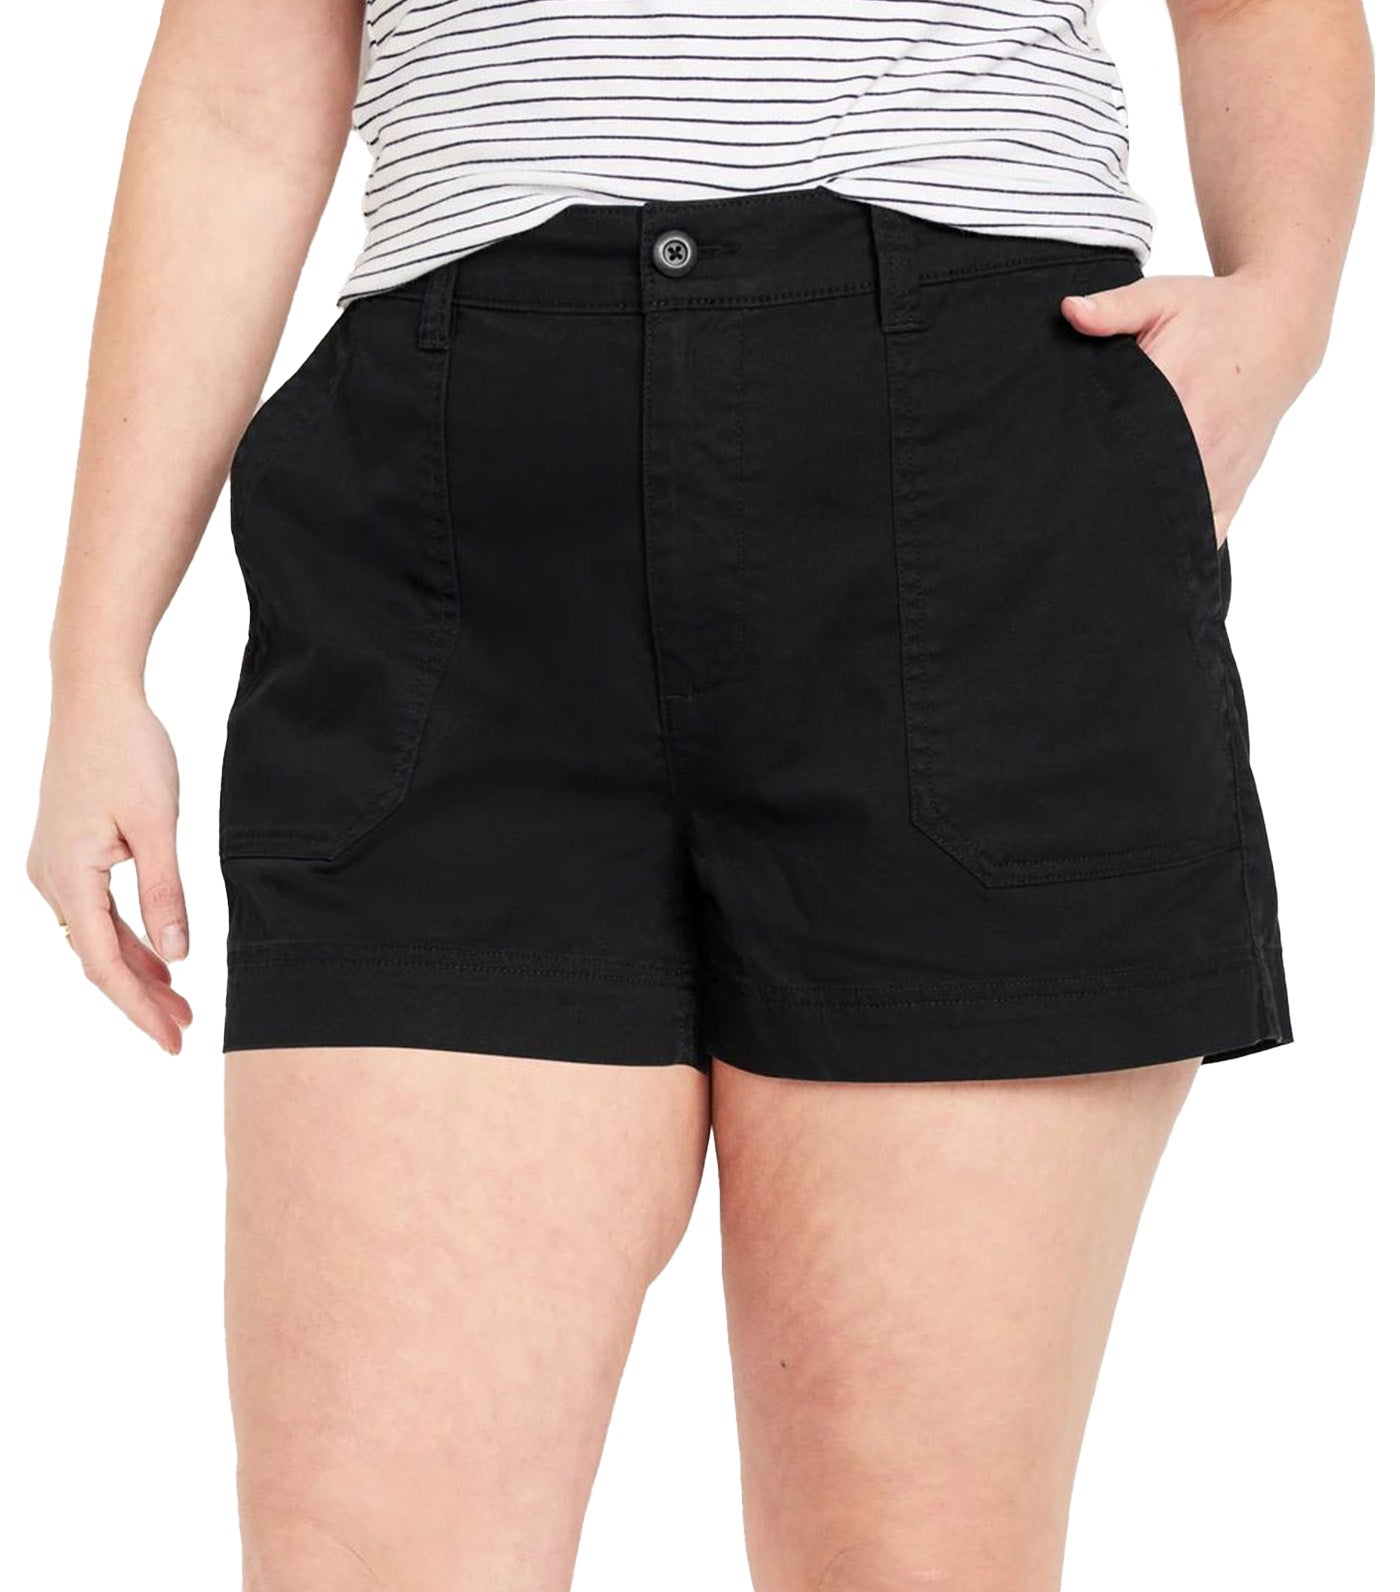 High-Waisted OGC Utility Chino Shorts for Women 3.5-inch inseam Black Jack